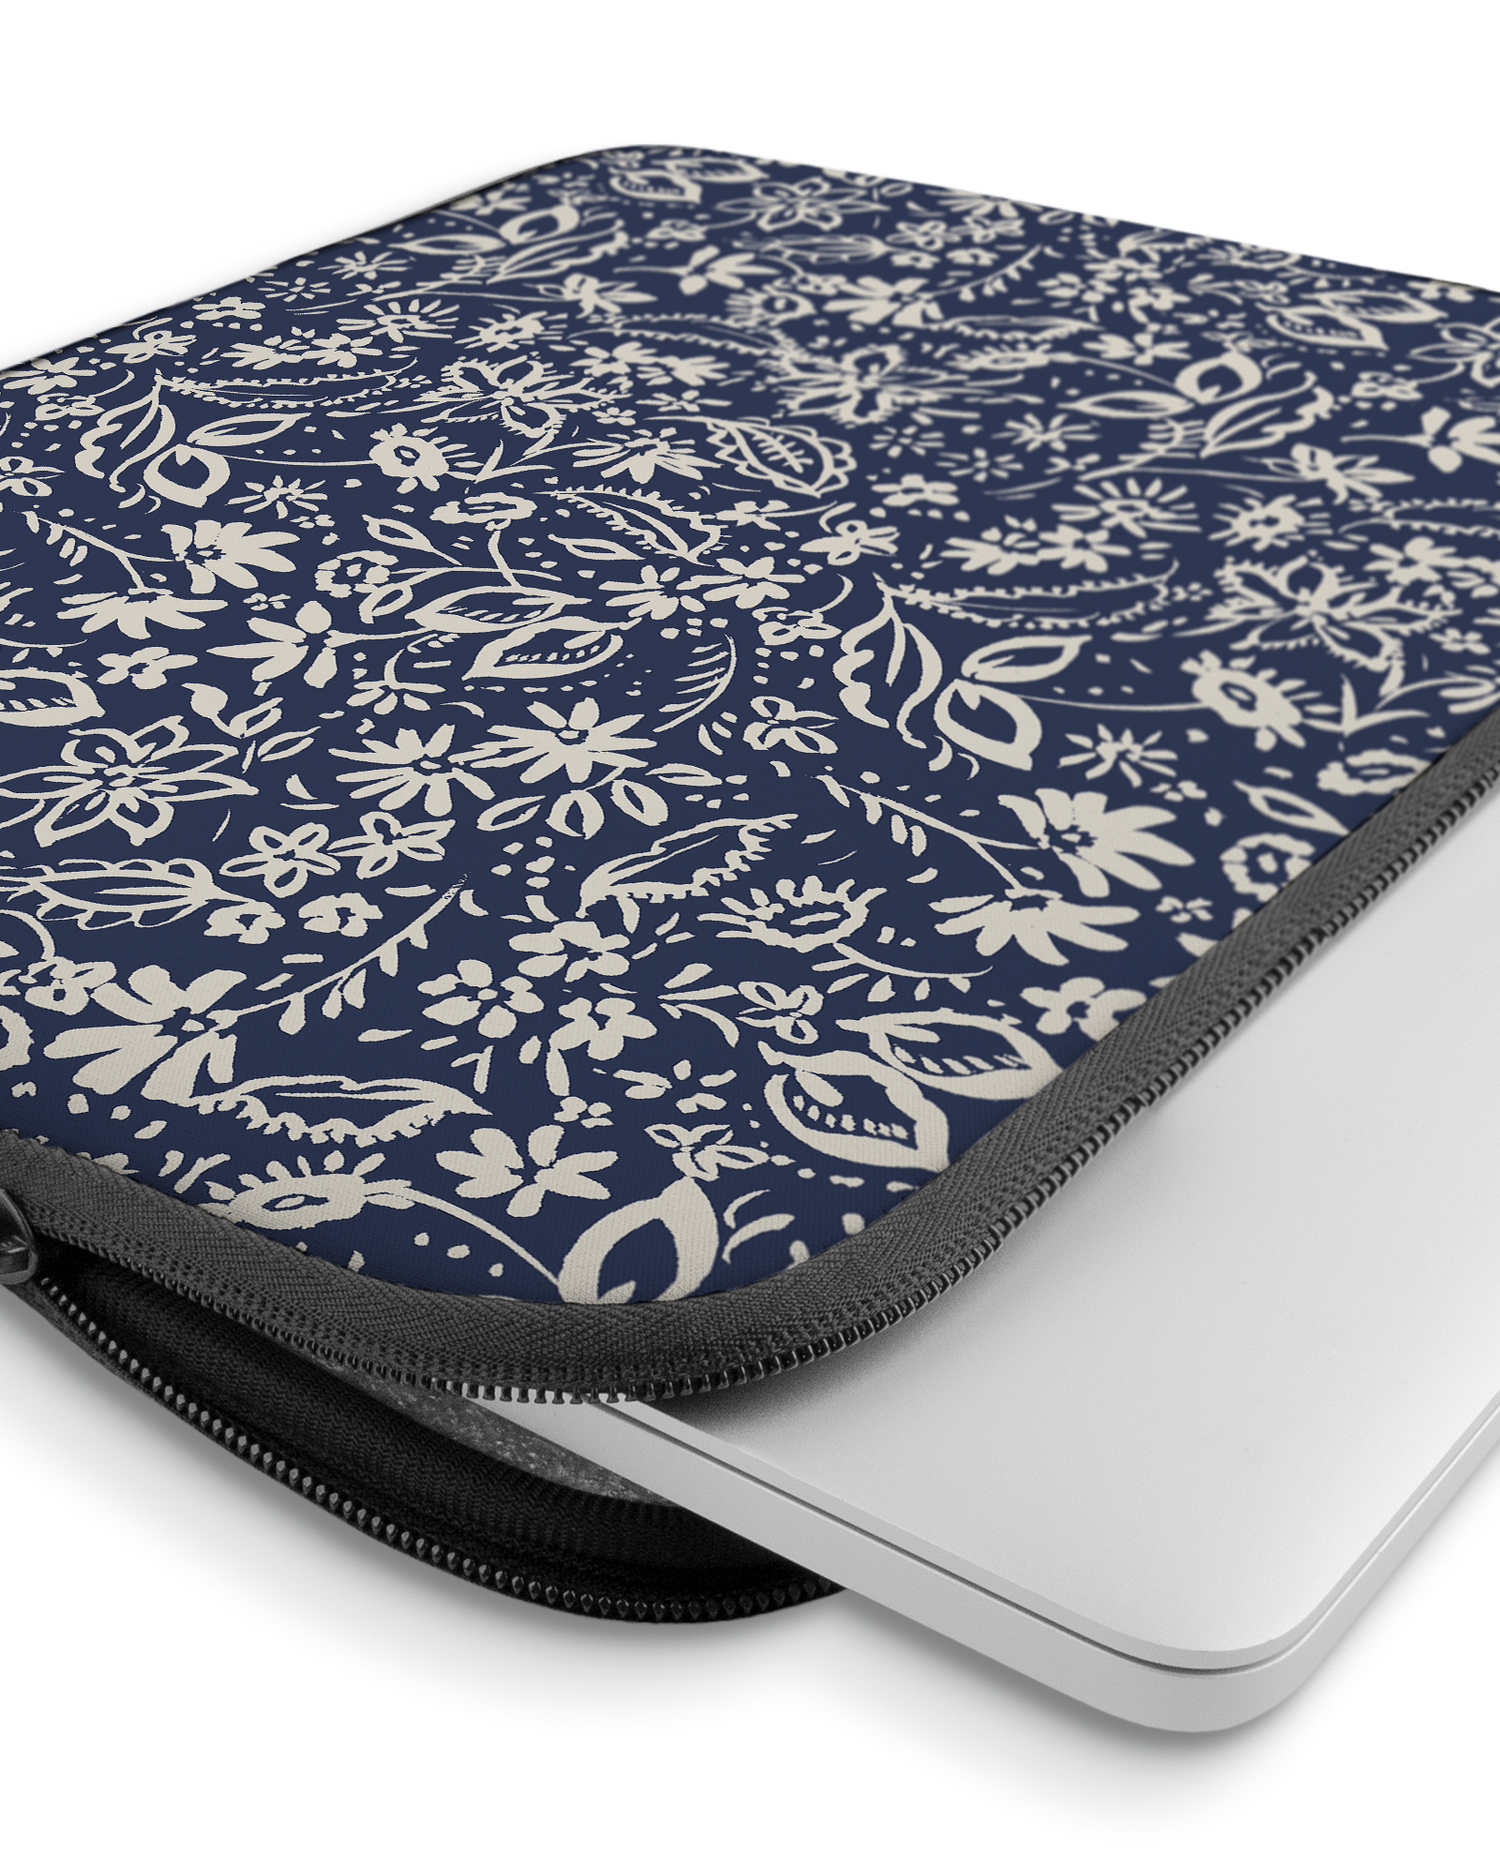 Ditsy Blue Paisley Laptop Case 15 inch with device inside